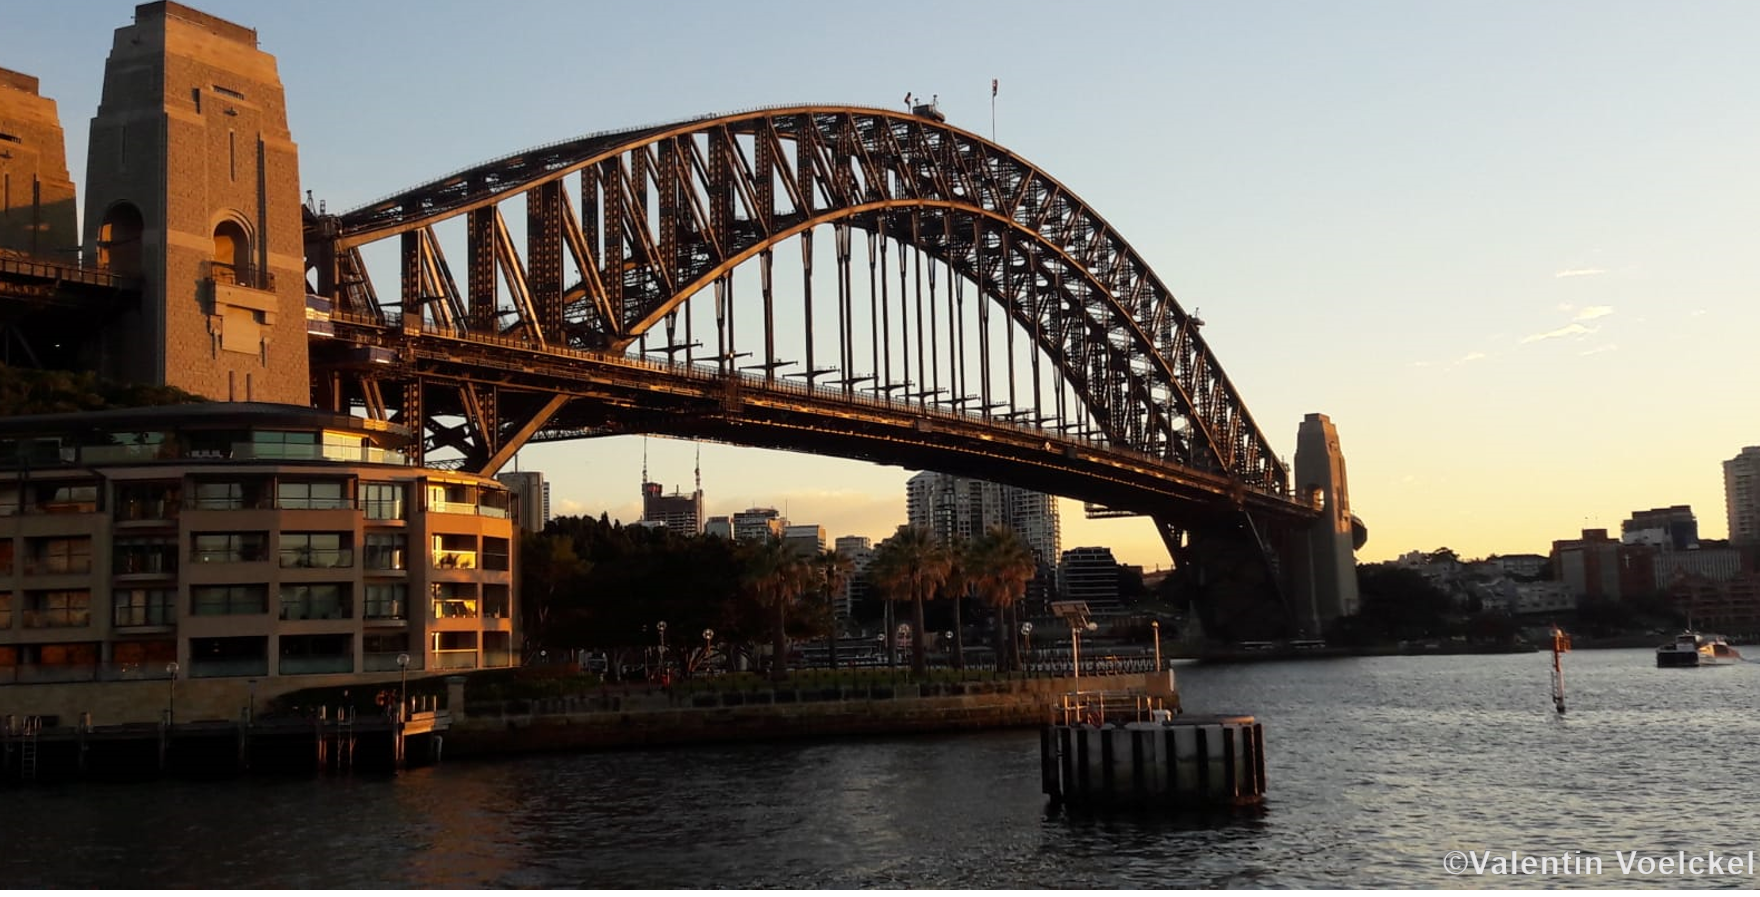 Semester abroad experience in Sydney